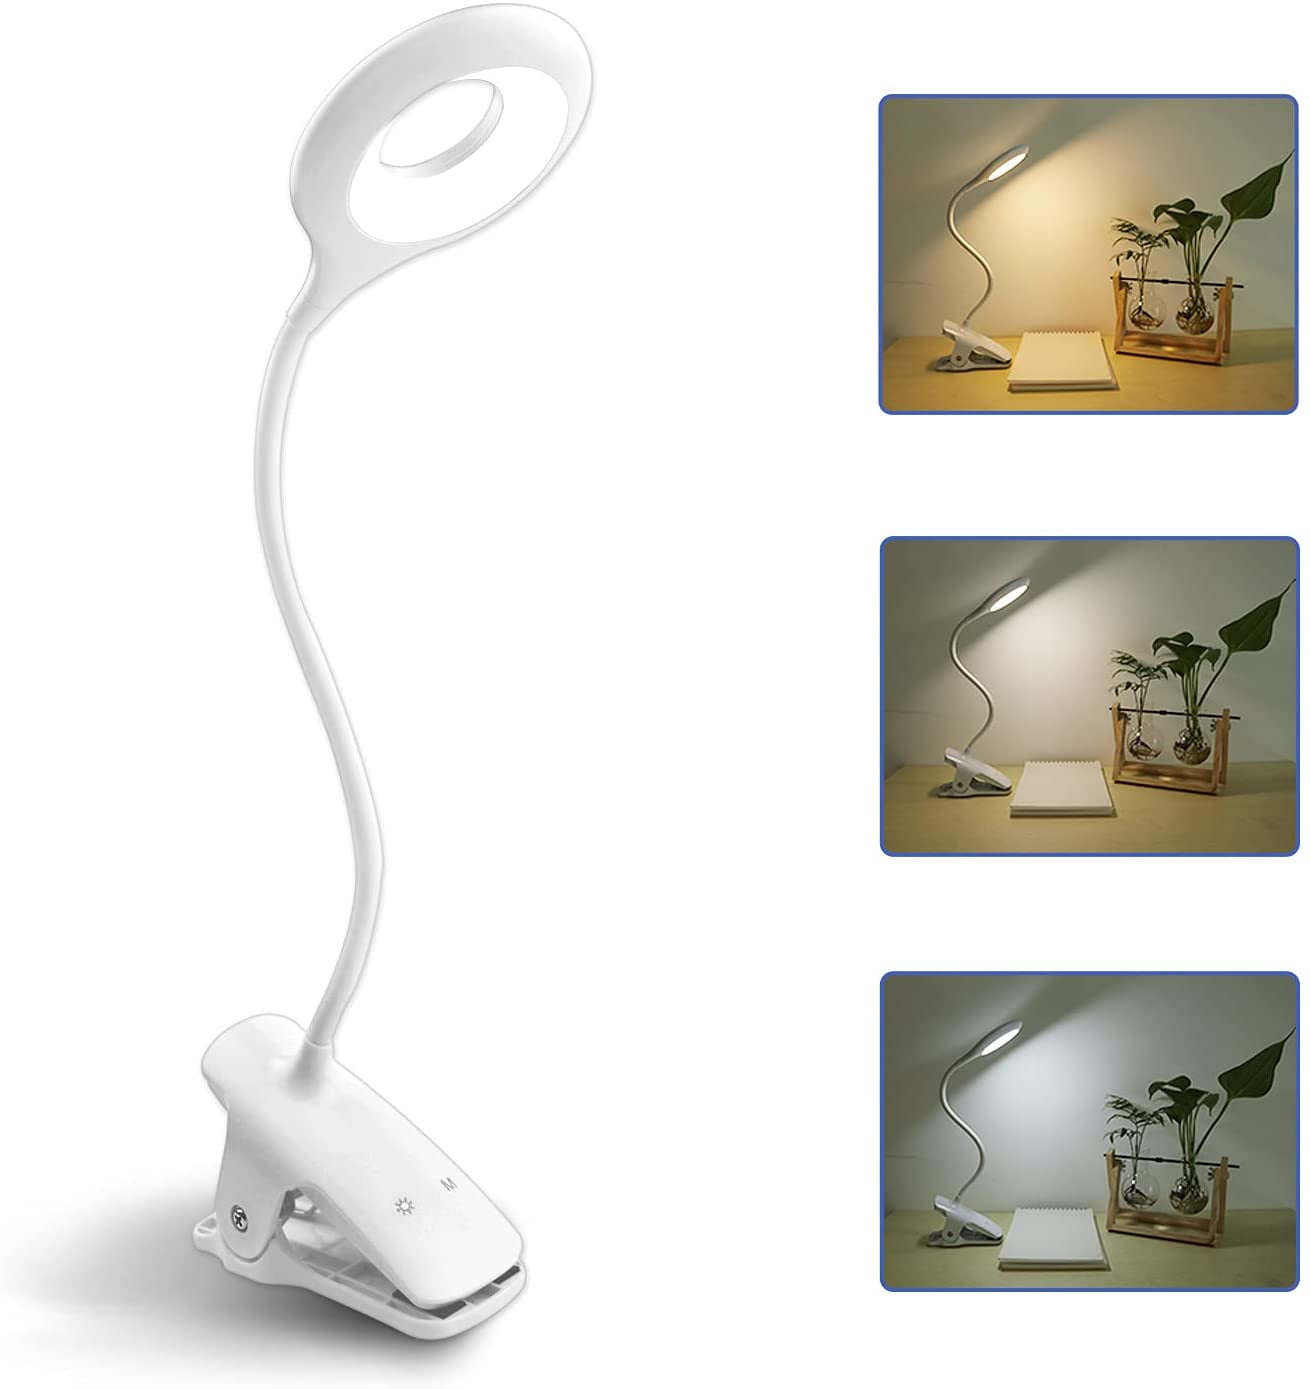 USB Flexible Reading LED Light Clip-on Beside Bed Desk Table Lamp Book Lamps A+ 